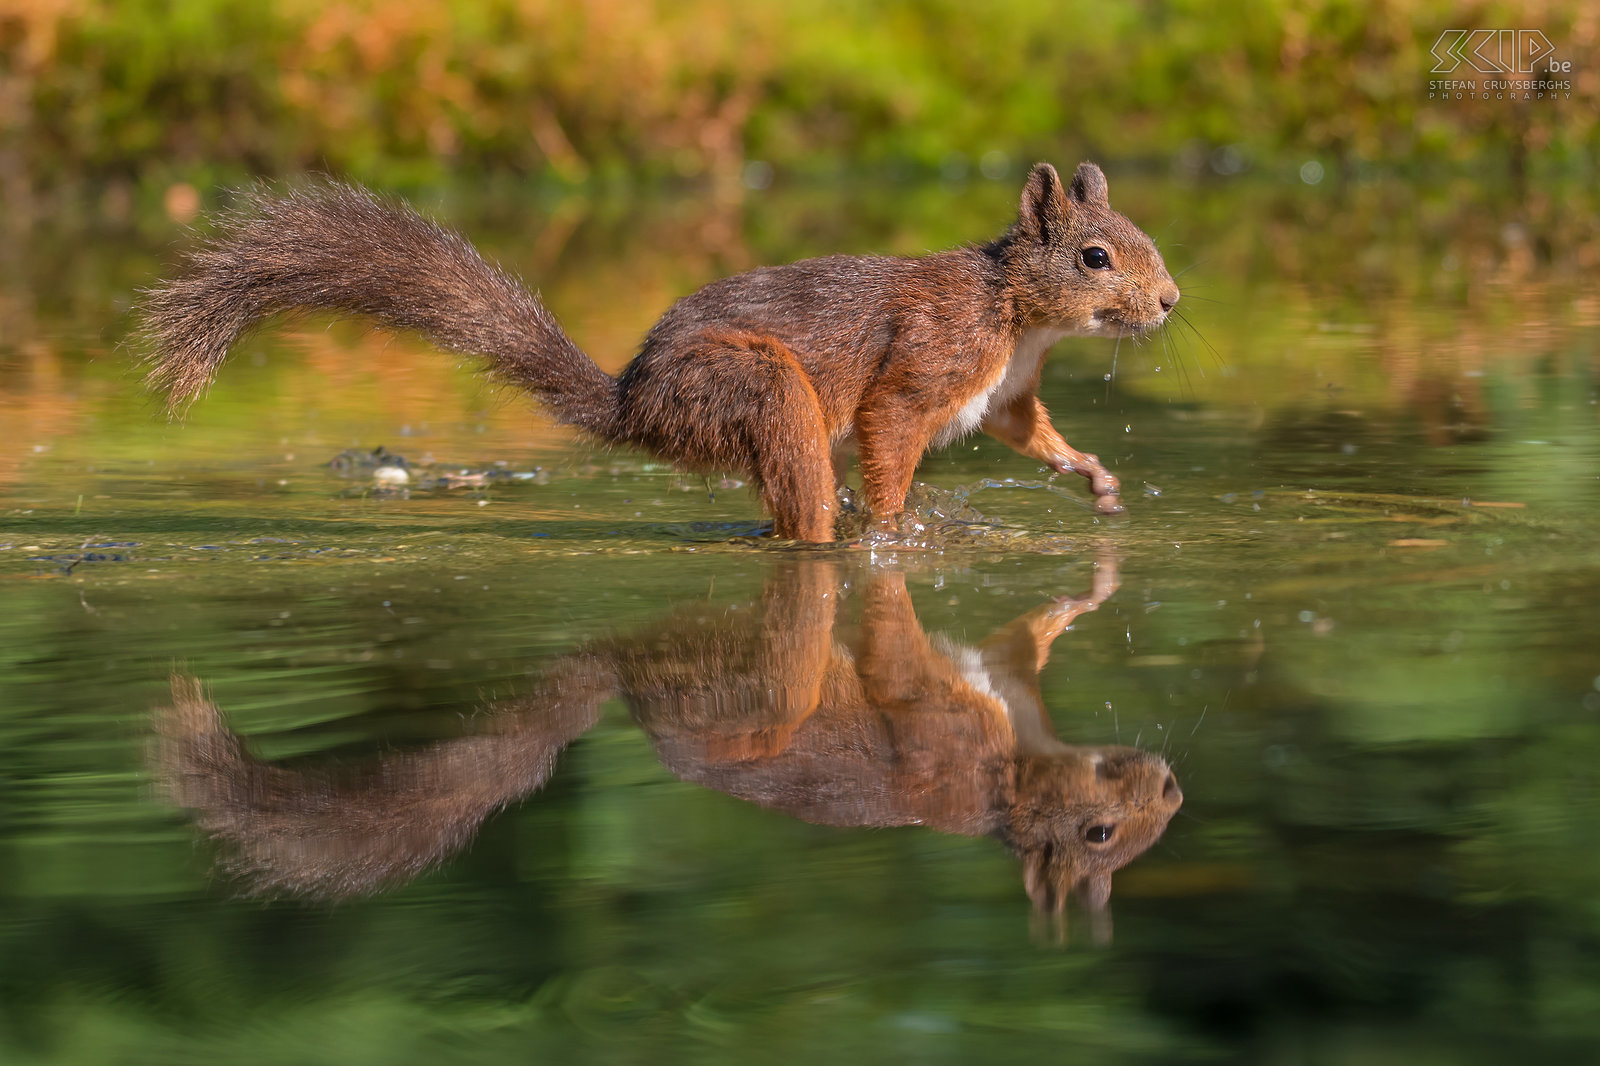 Squirrel in a pool During a hot summer day, this red squirrel ran through the water of a shallow pool which resulted in an a beautiful reflection Stefan Cruysberghs